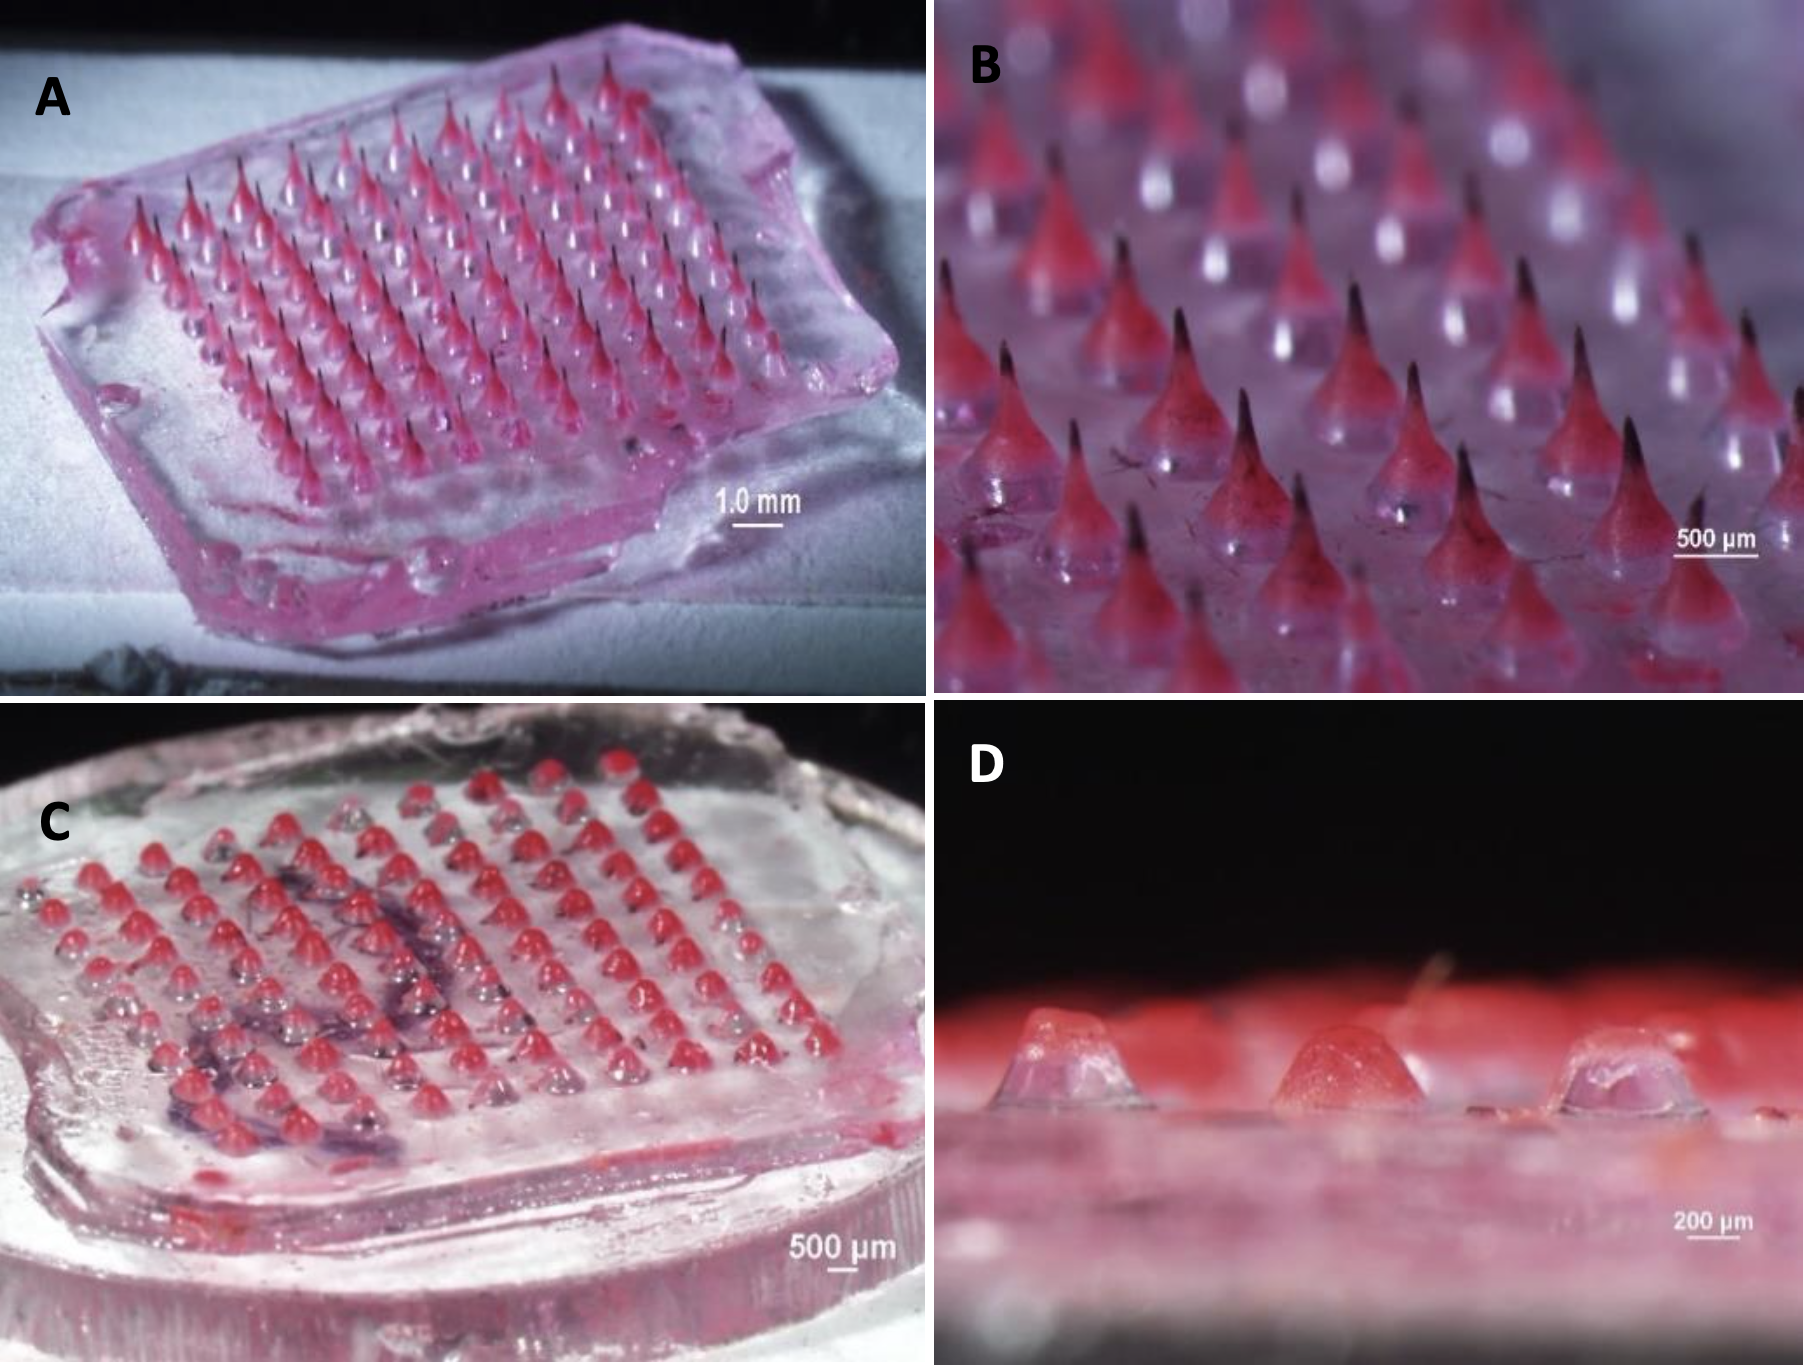 A ¬– Square microneedle patch with sharply defined microneedles; B – Close-up of sharply defined microneedles; C – Square microneedle patch with rounded pedestals where microneedles have melted; D – Close-up of rounded pedestals with no microneedles.